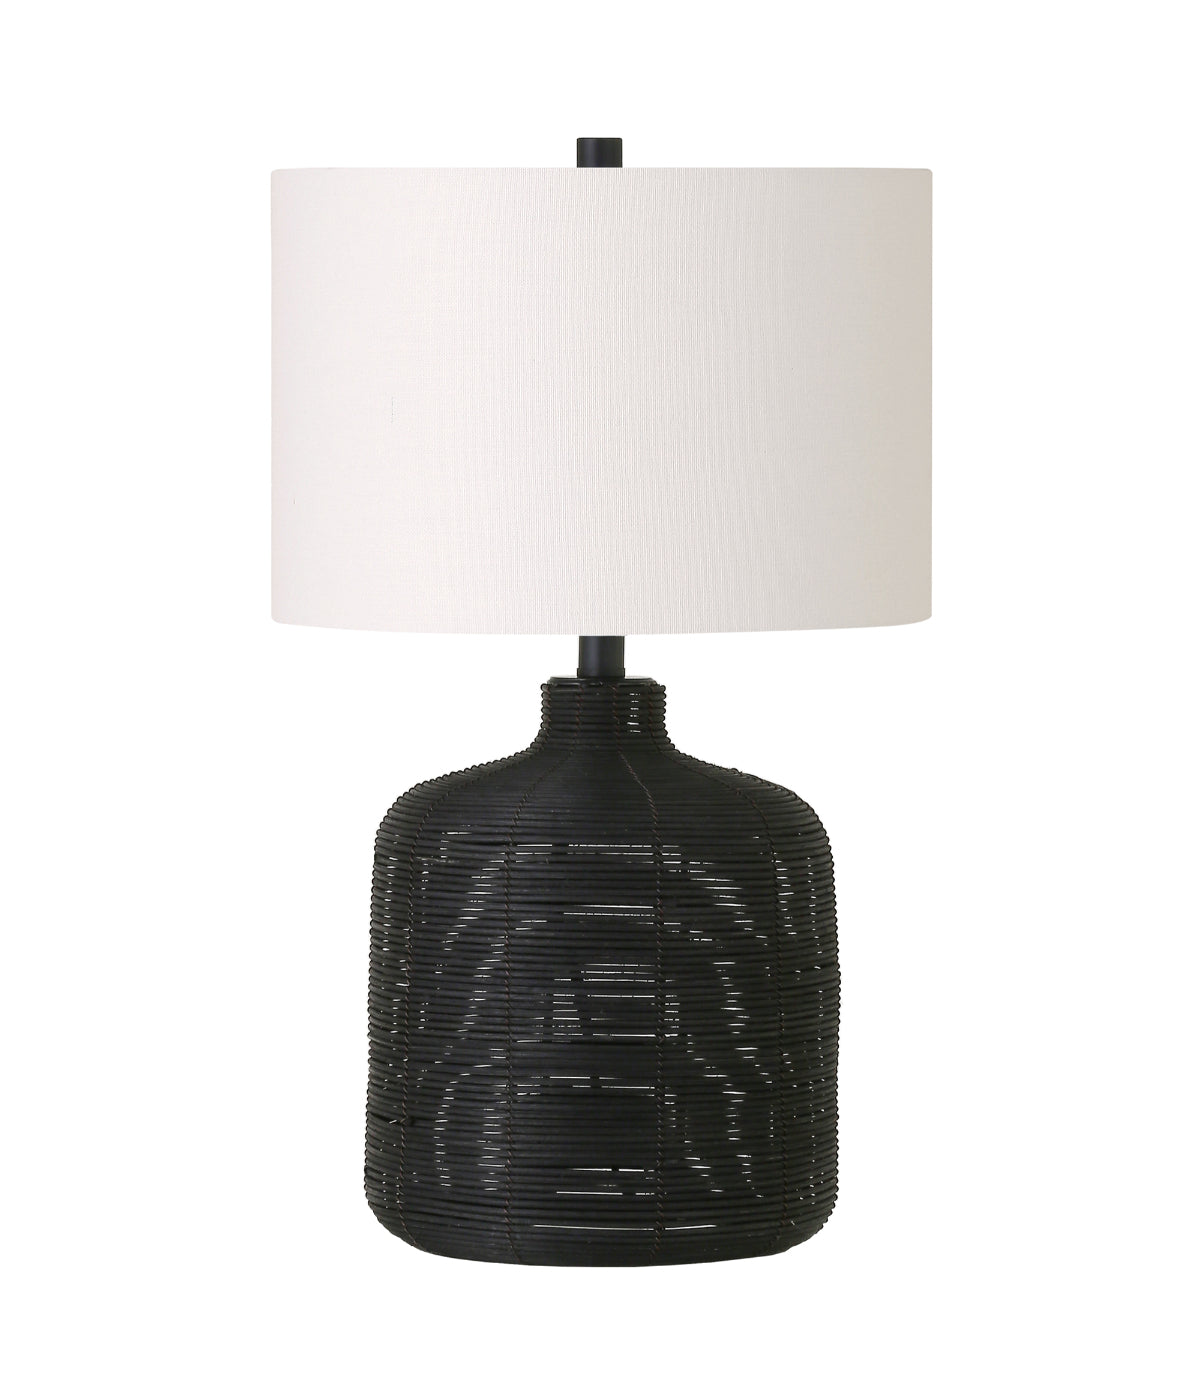 Zoey Petite & Rattan Table Lamp with Fabric Shade Black Rattan & White